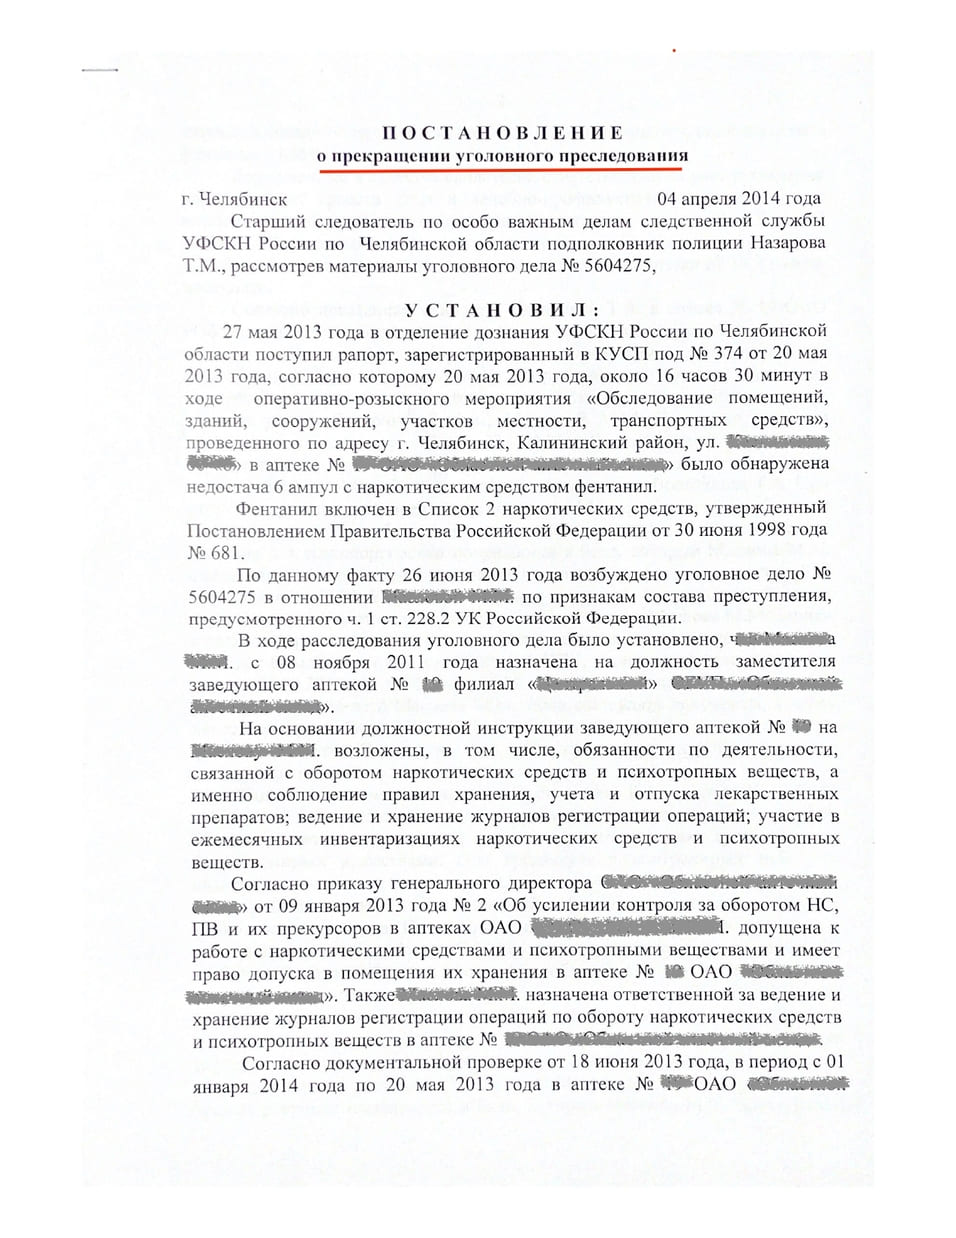 Ст. 228.2 УК РФ. 